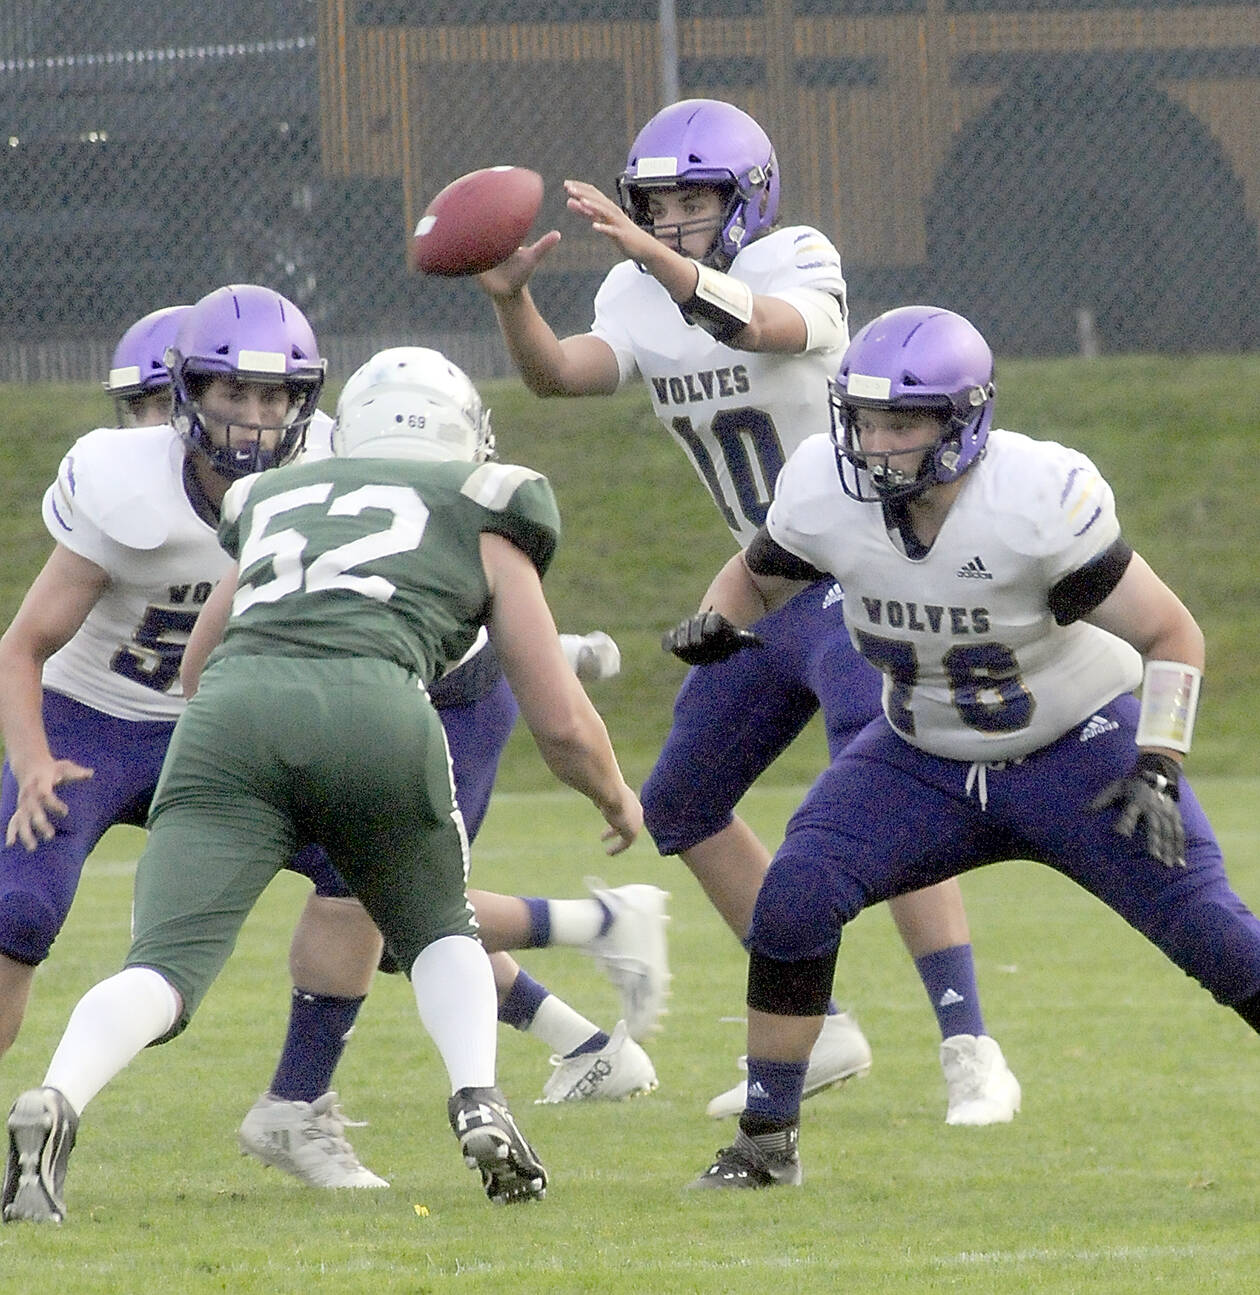 KEITH THORPE/PENINSULA DAILY NEWS
Sequim quarterback Lars Weiker receives the snap as linemen Ayden Holland, left, and XXXX XXXX (No. 78) defend against Port Angeles' Thomas Arand on Friday.